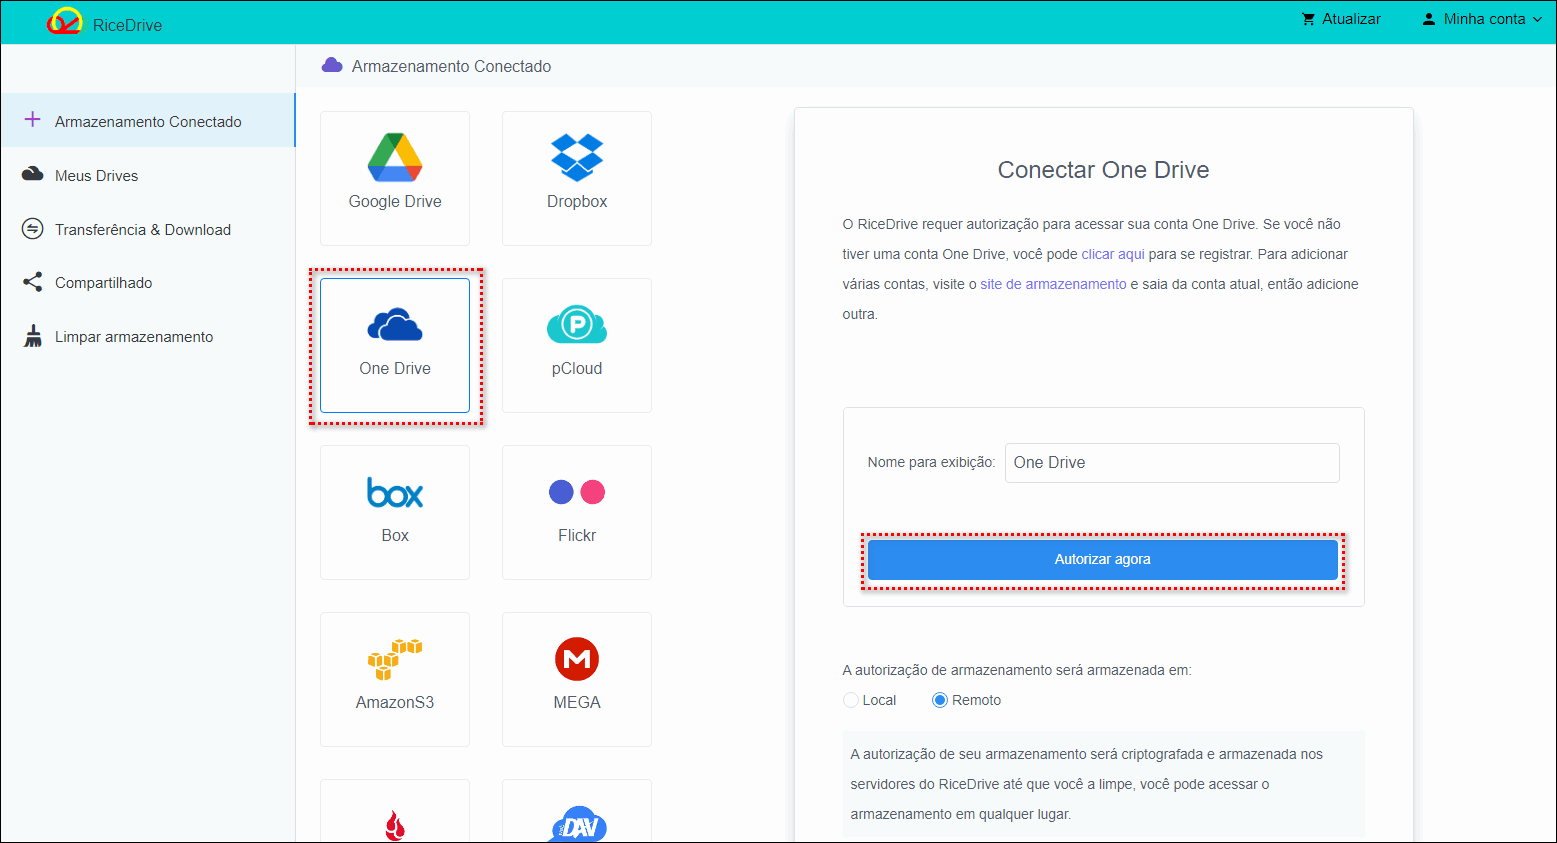 Authorize OneDrive to RiceDrive